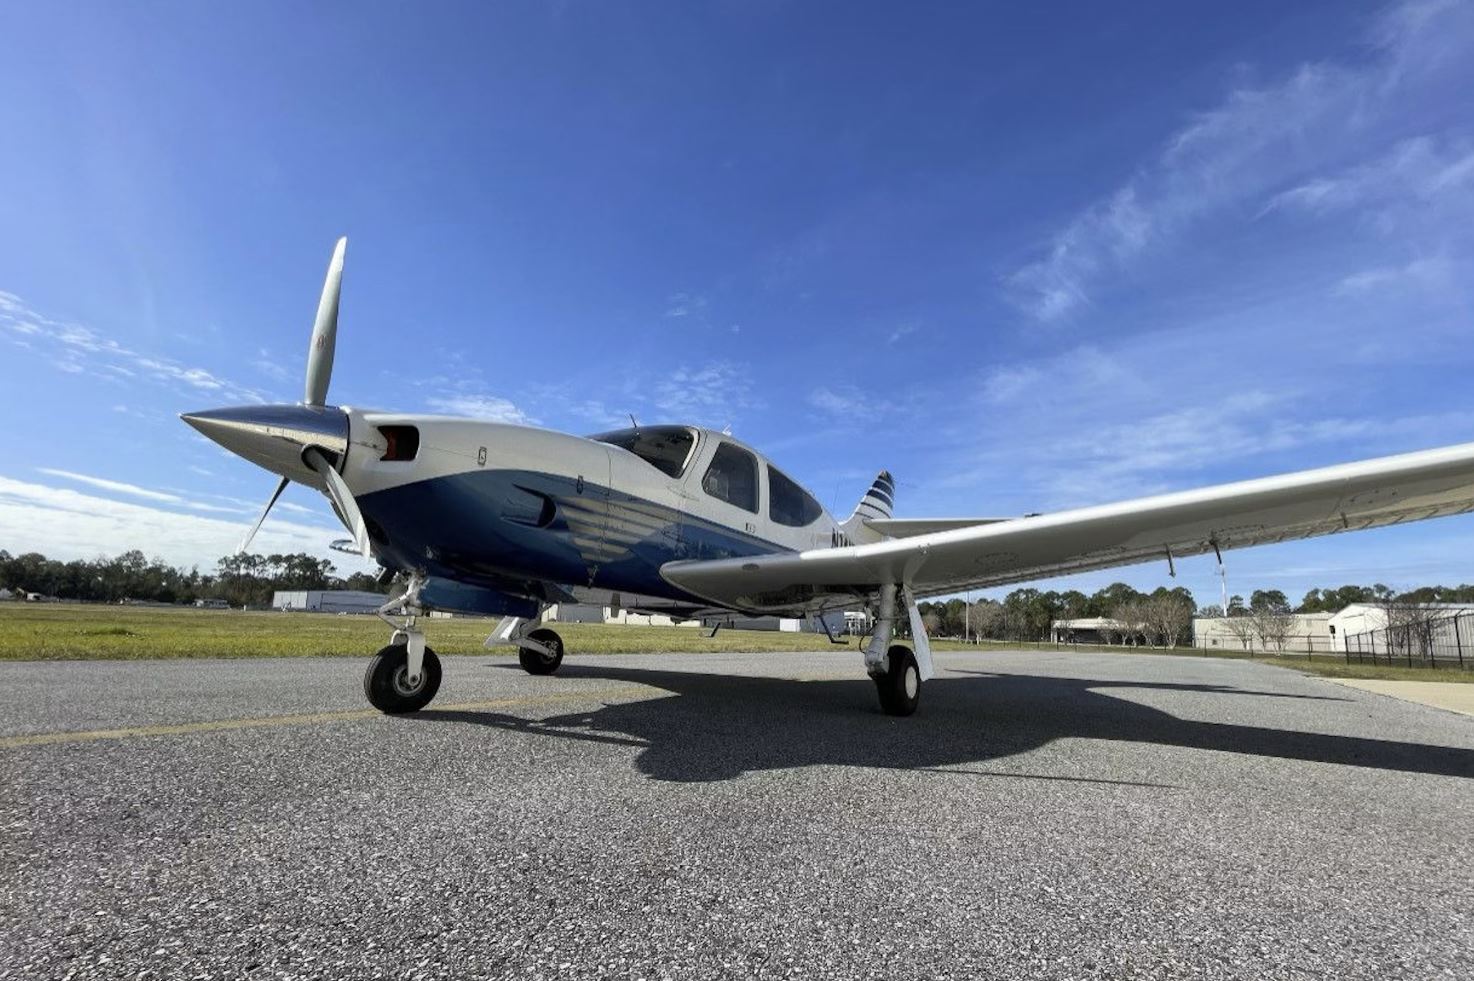 This 1975 Rockwell Commander 112 Is a Stylish, Sturdy ‘AircraftForSale’ Top Pick